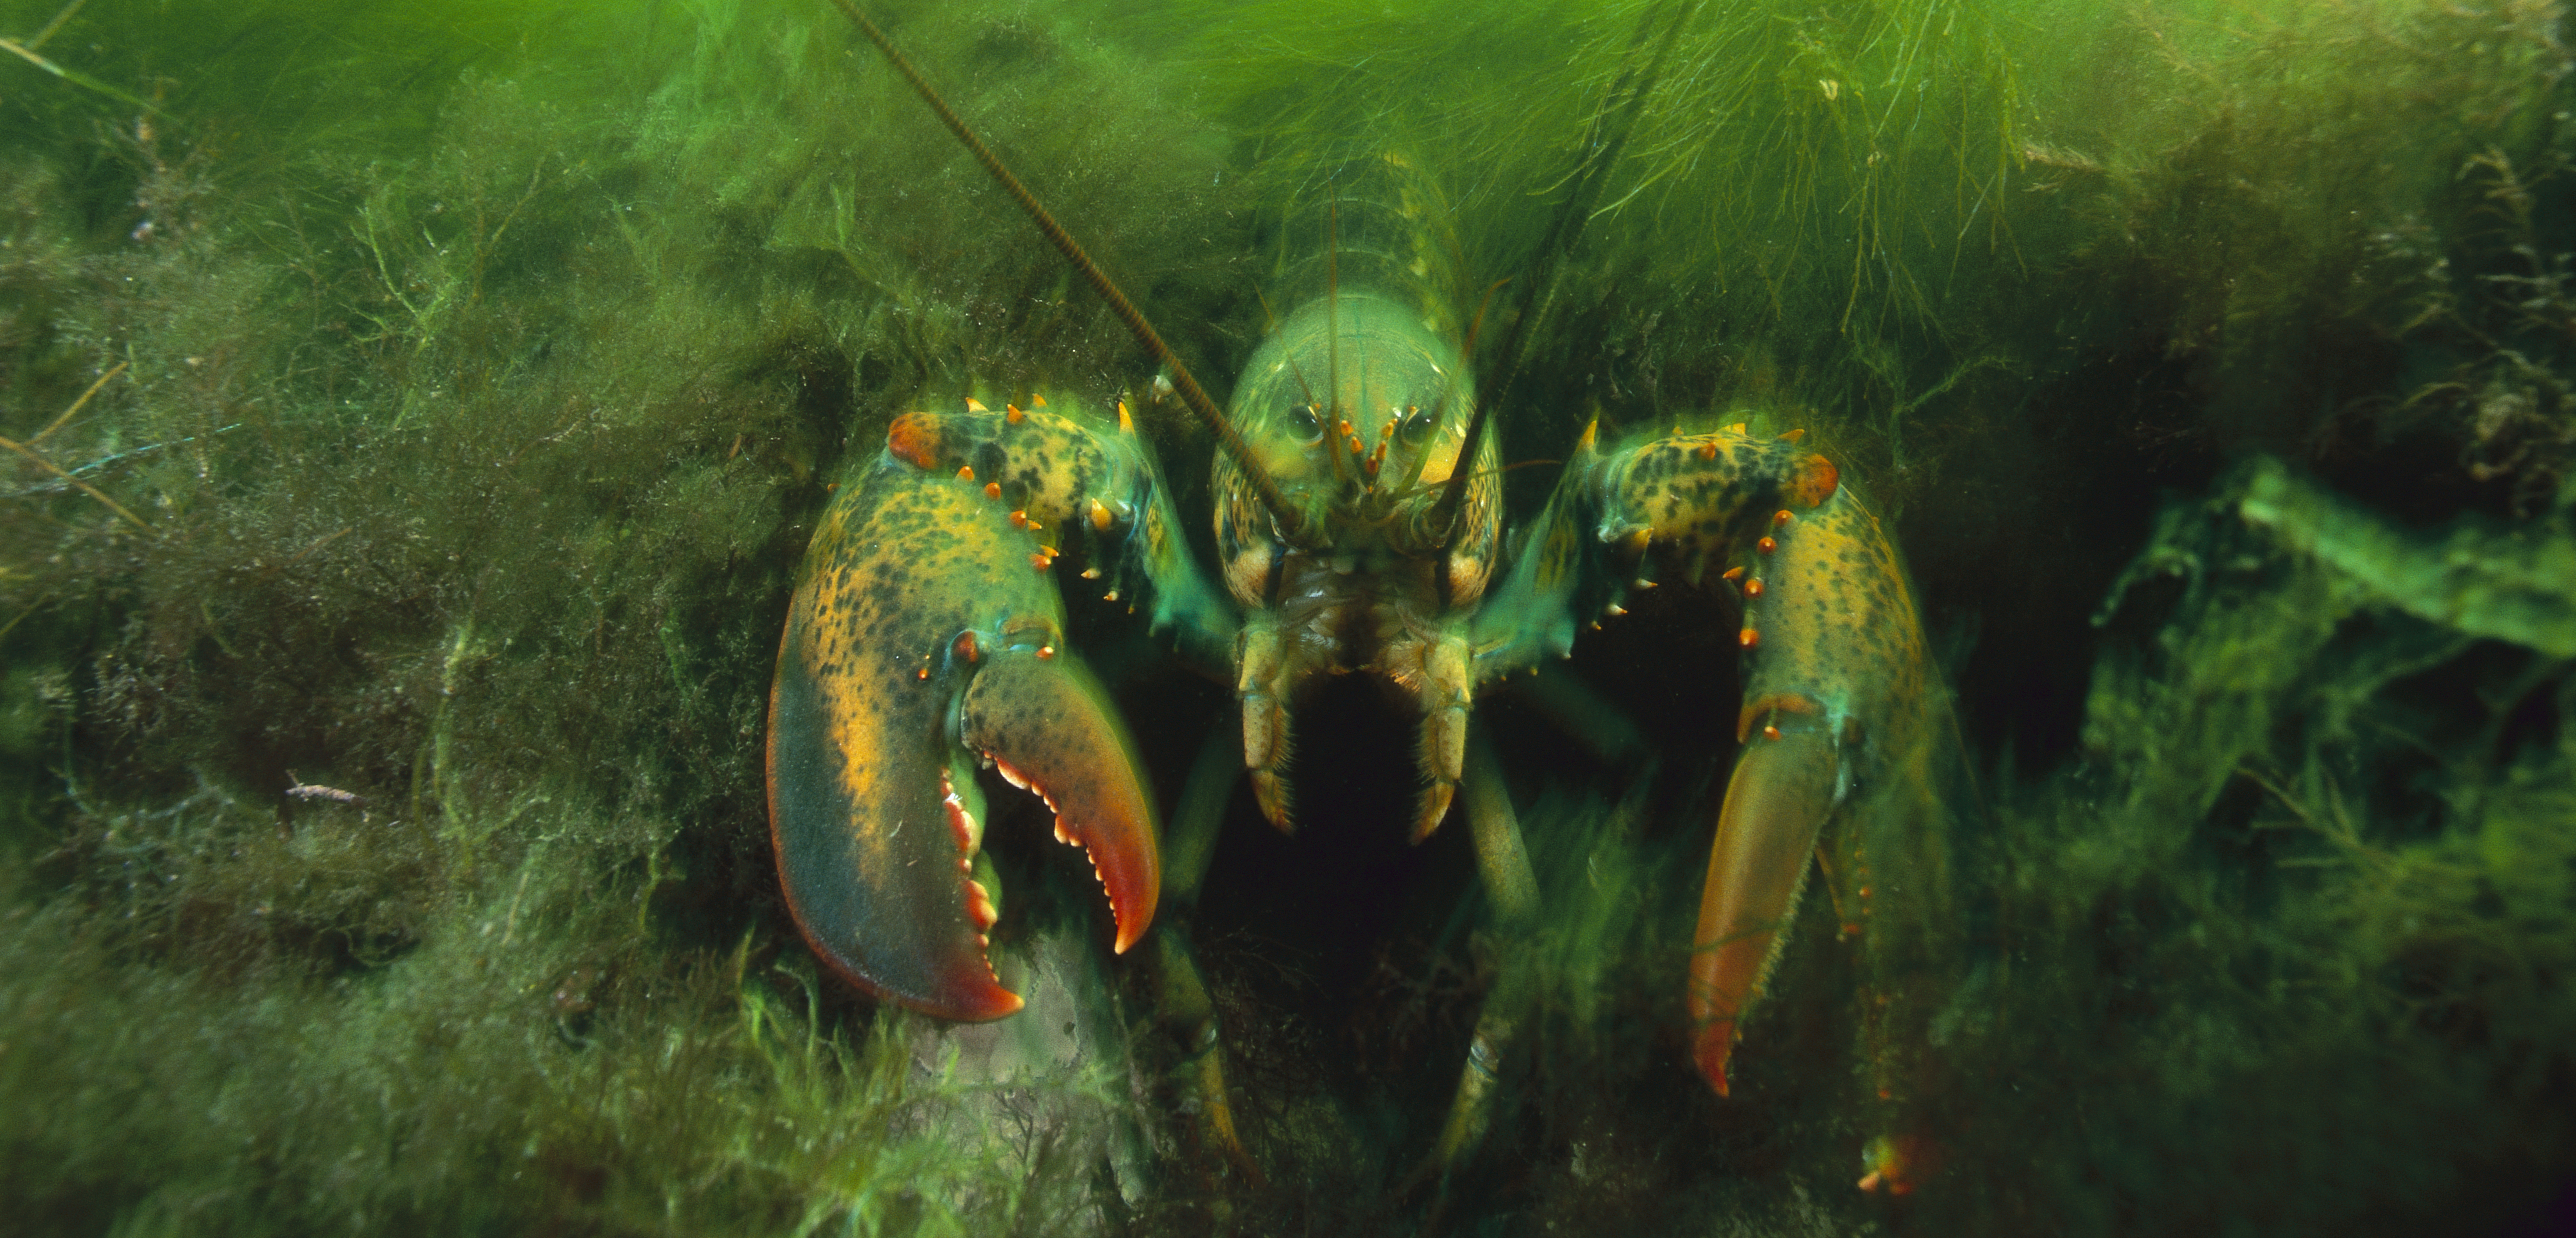 To date, Maine’s lobsters have only been lightly affected by “lobster shell disease,” but that could change as the water warms. Photo by Scott Leslie/Minden Pictures/Corbis